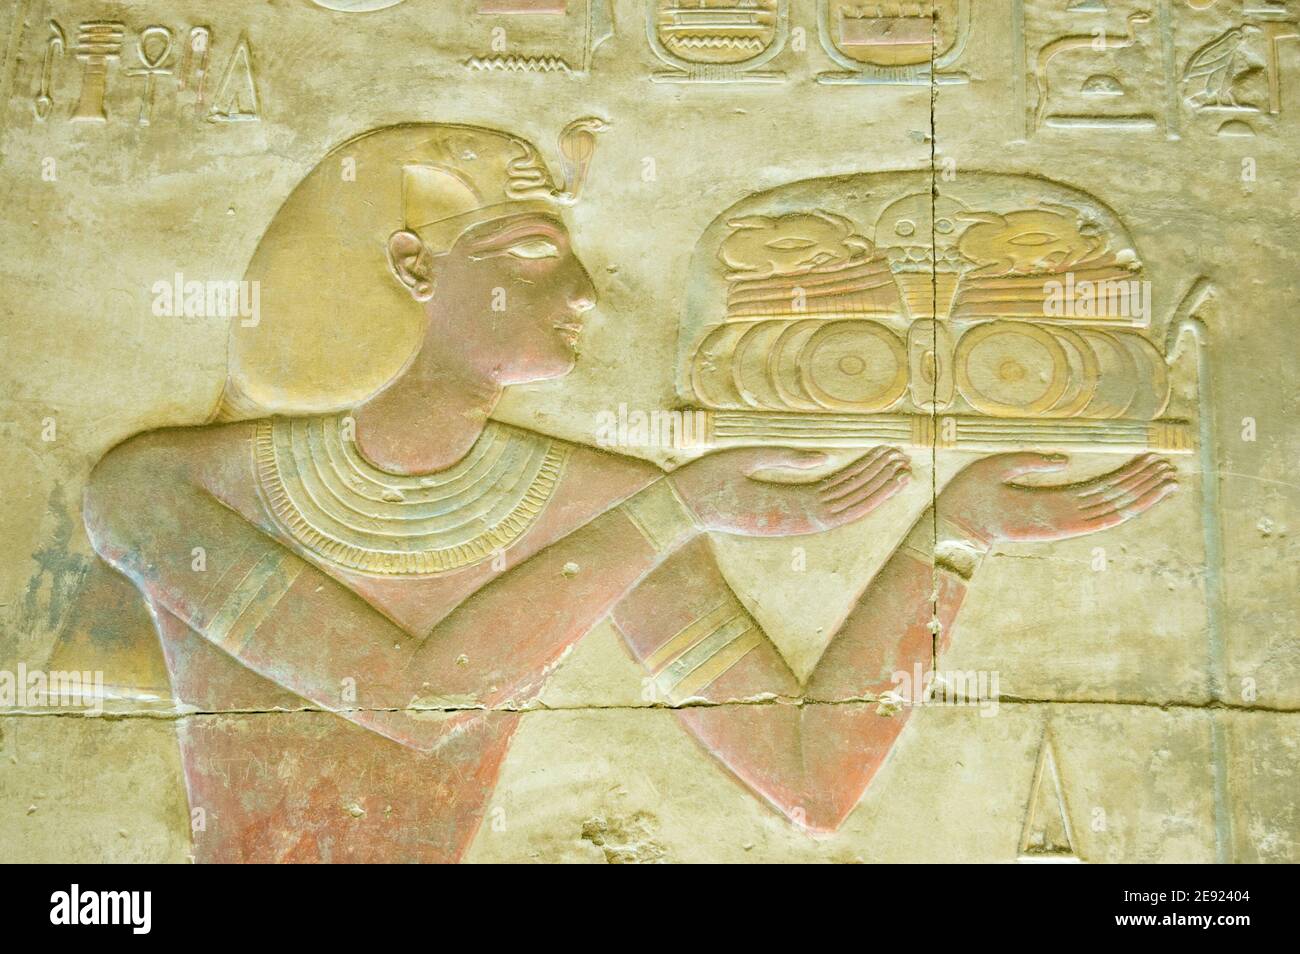 Ancient Egyptian bas relief sculpture showing the Pharaoh Seti I with an offering for the gods. Temple of Osiris, Abydos near el Balyana, Egypt. Ancie Stock Photo